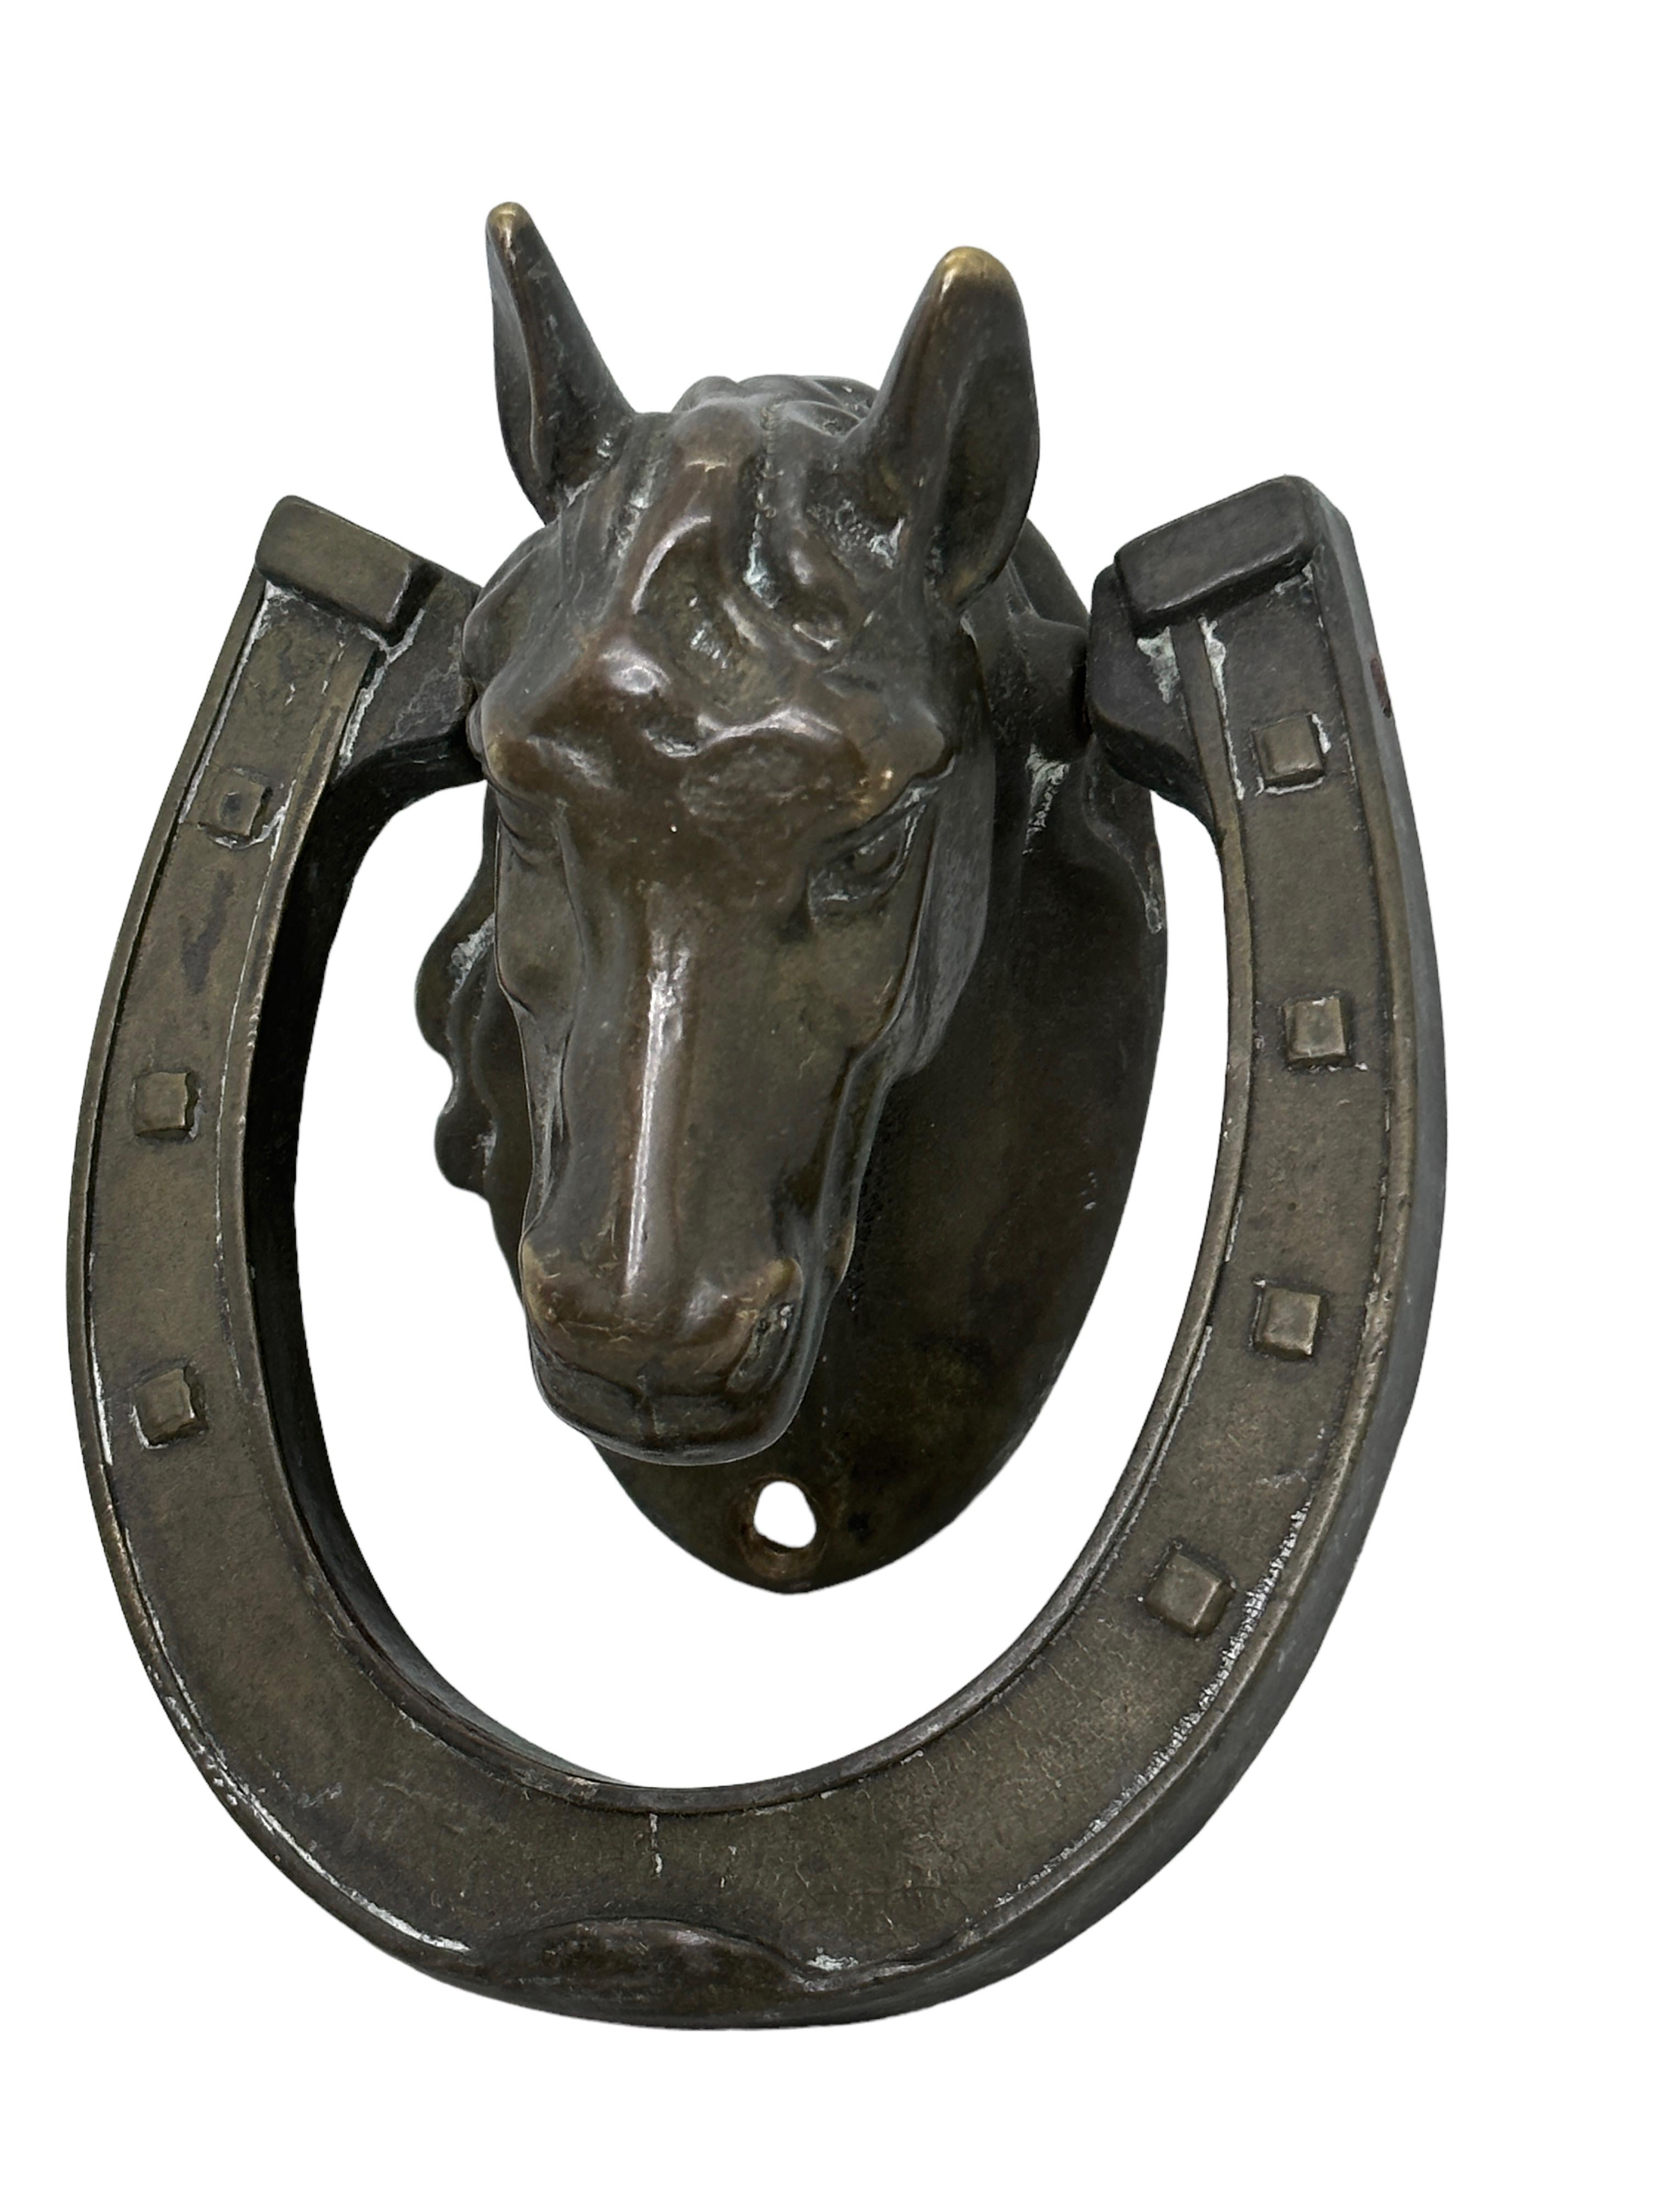 Classic 19th century European Horse head door knocker, made of Bronze. Nice addition to your front door. Found at an estate sale in Vienna, Austria. It is not marked.